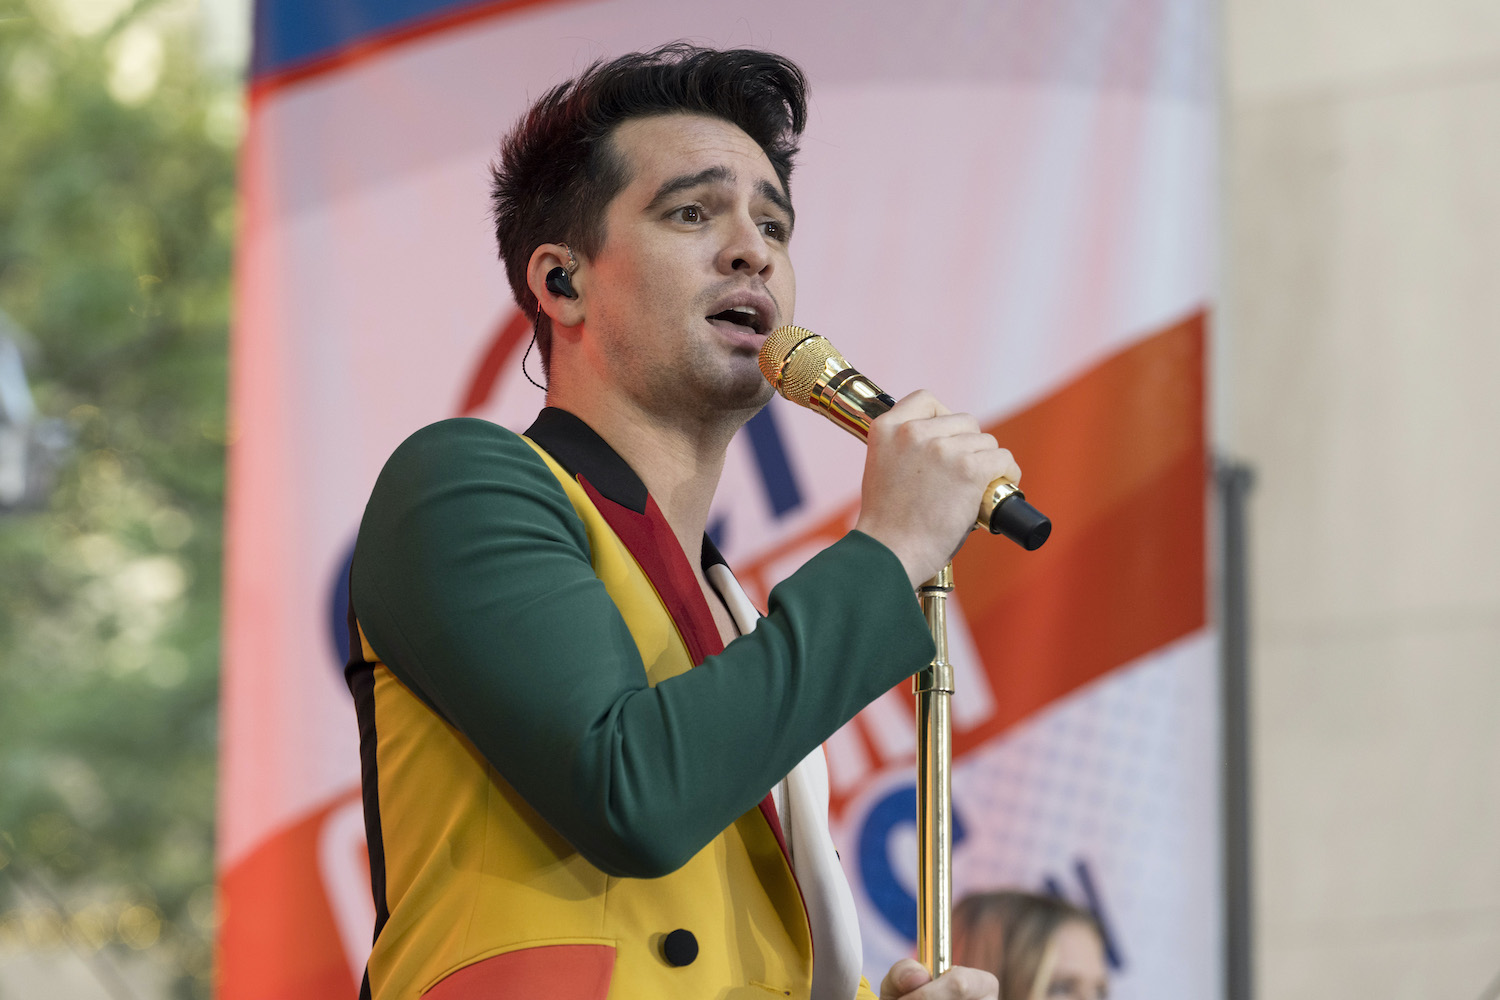 Brendon Urie wears a multi-colored jacket and sings with Panic! At The Disco during a 2022 Today show performance